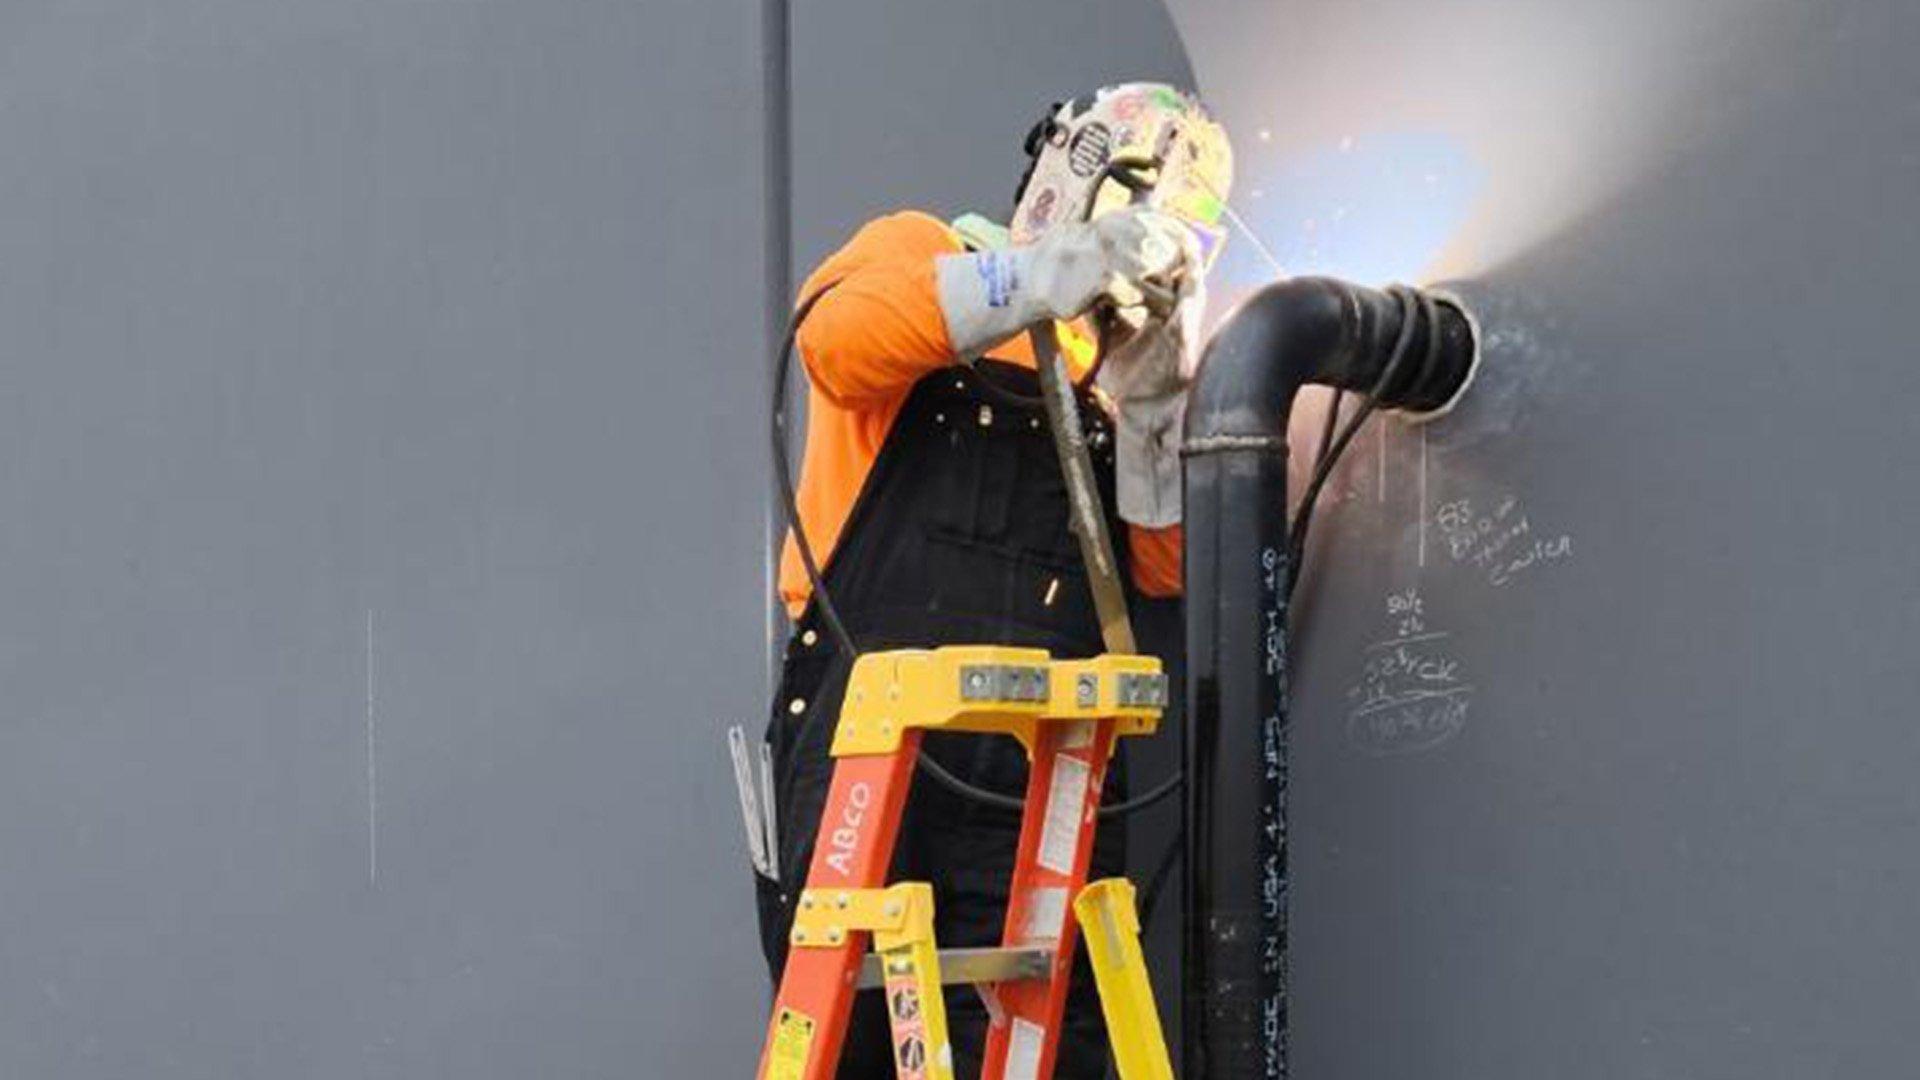 Emily S, wearing a welding helmet and protective gloves, stands on a ladder and welds a black pipe next to a gray wall.